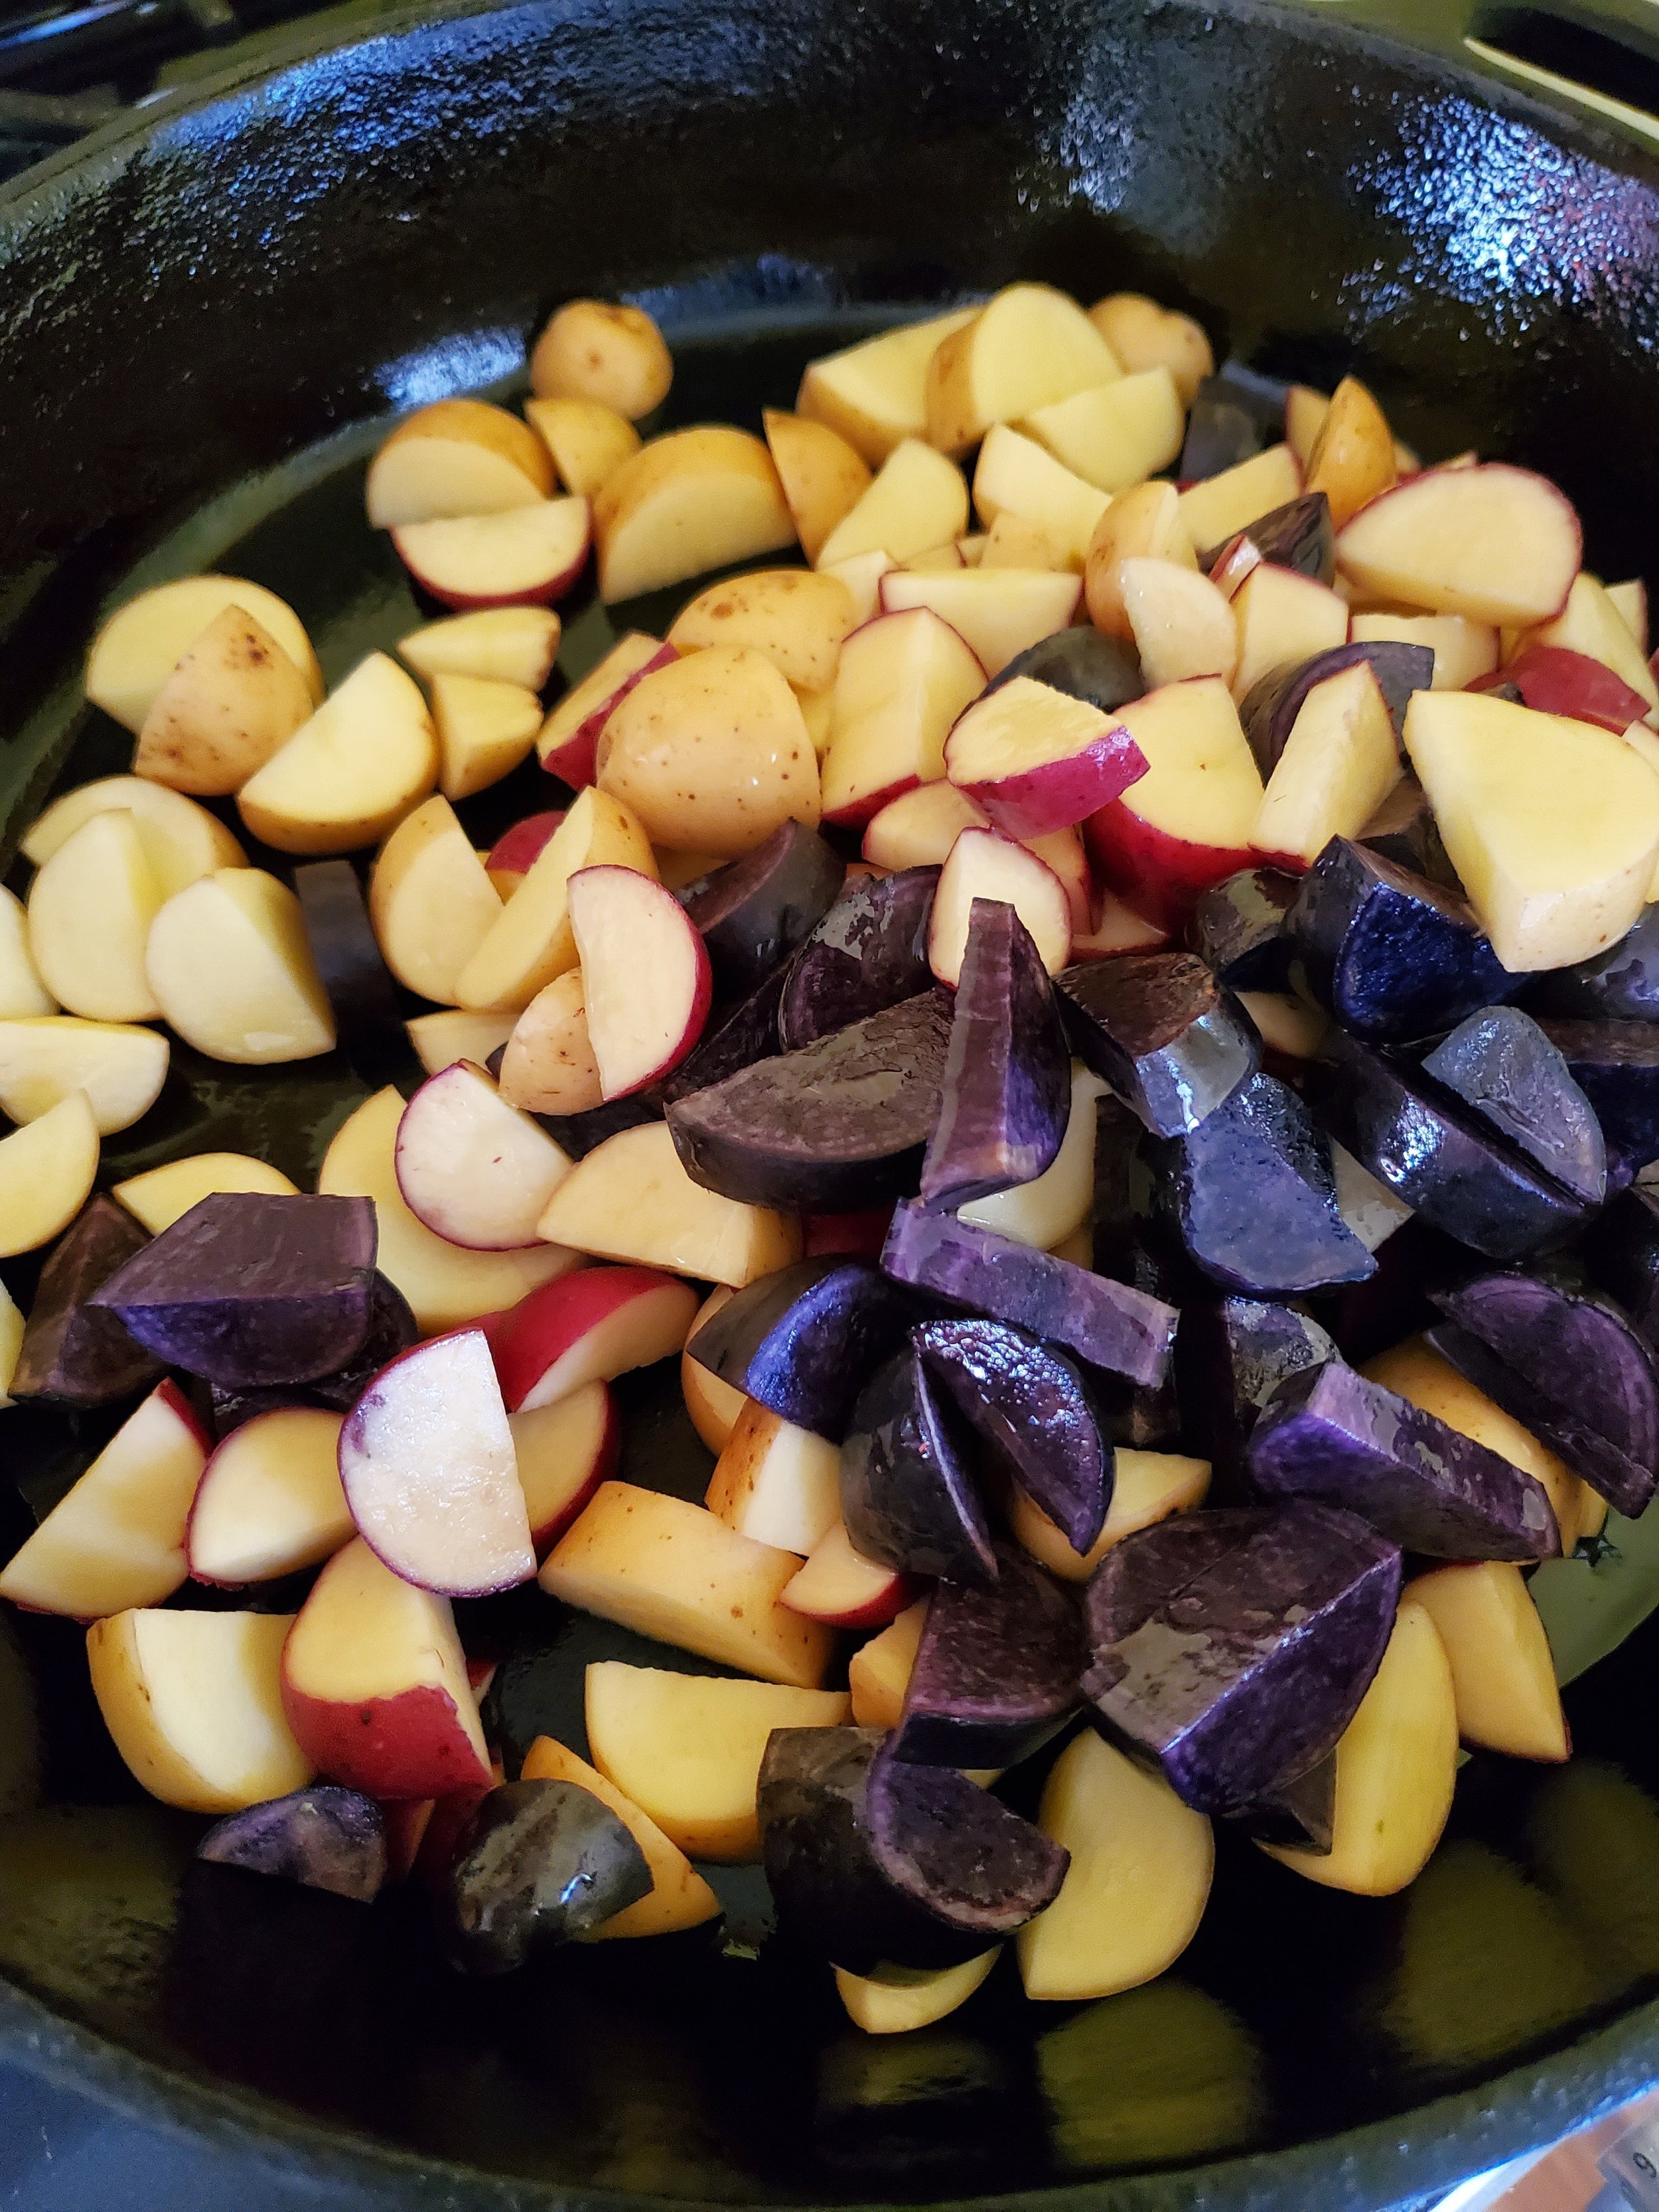 Adding the potatoes to the pan, including those lovely purple ones!